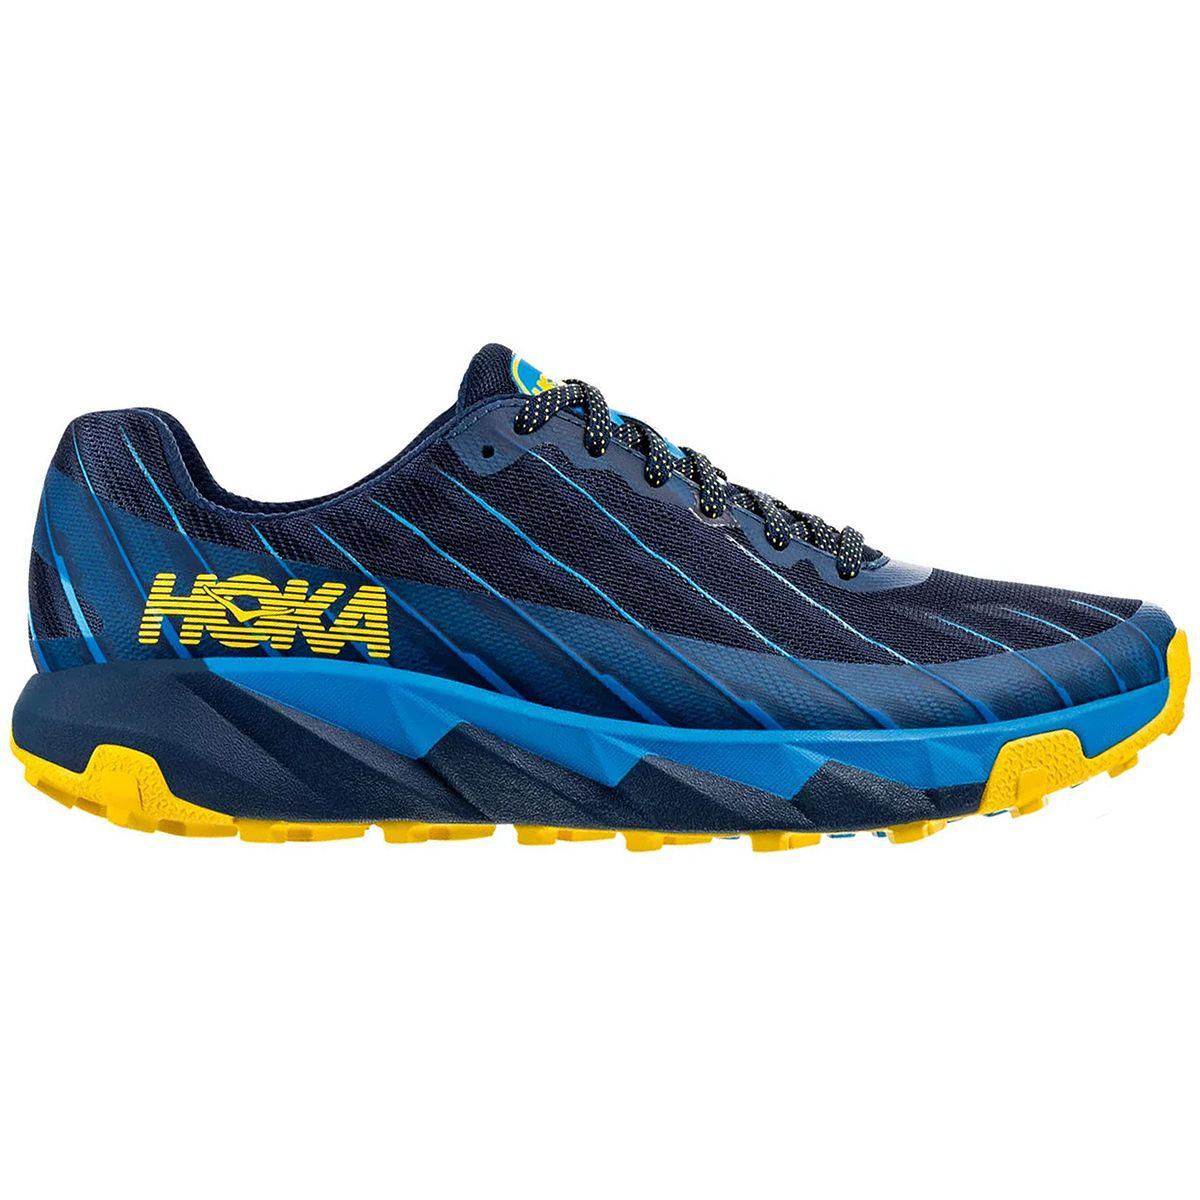 Hoka One One Rubber Torrent Trail Running Shoe in Blue for Men - Lyst